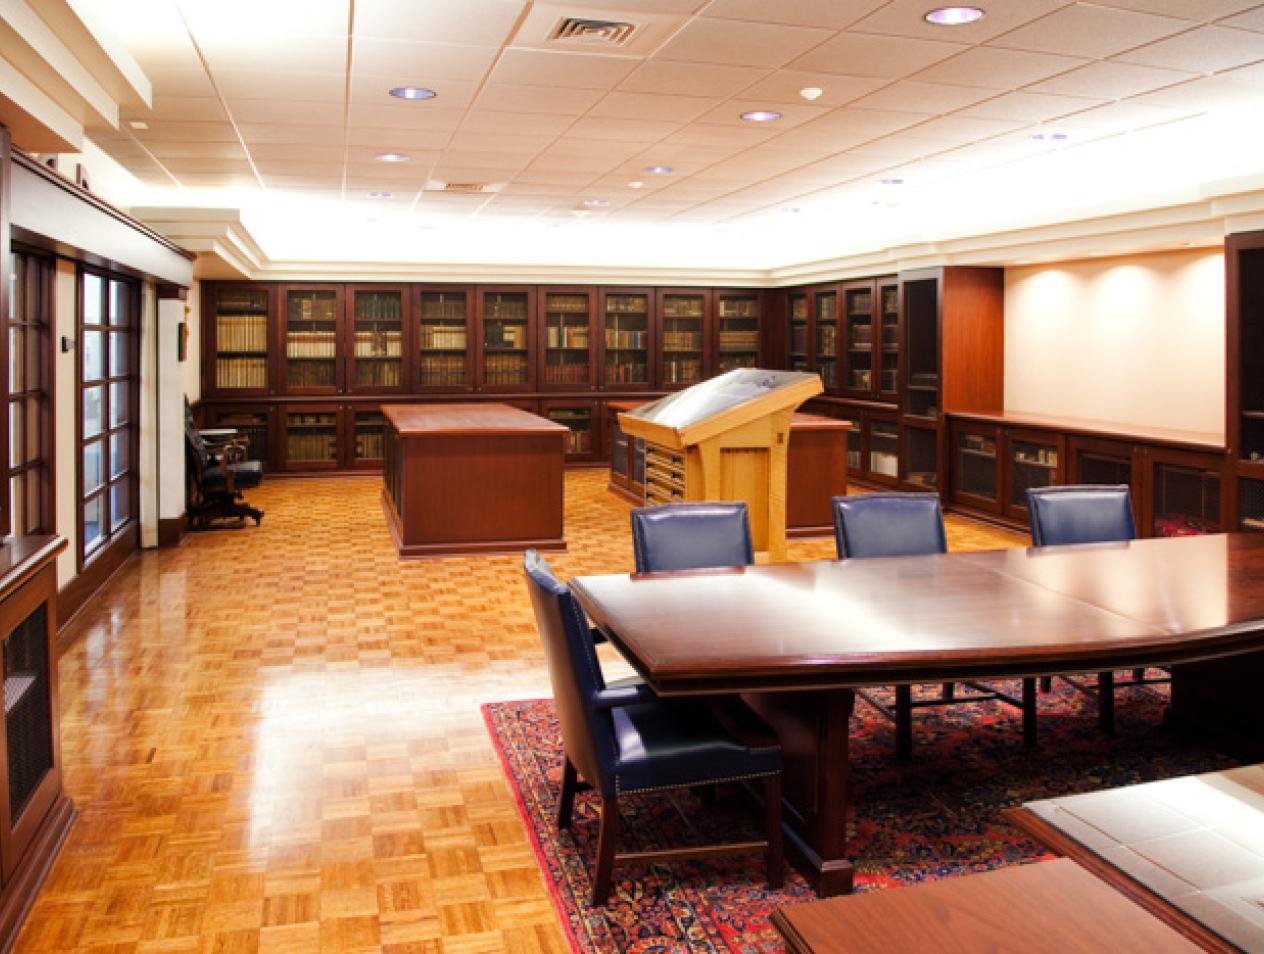 University Archives and Special Collections